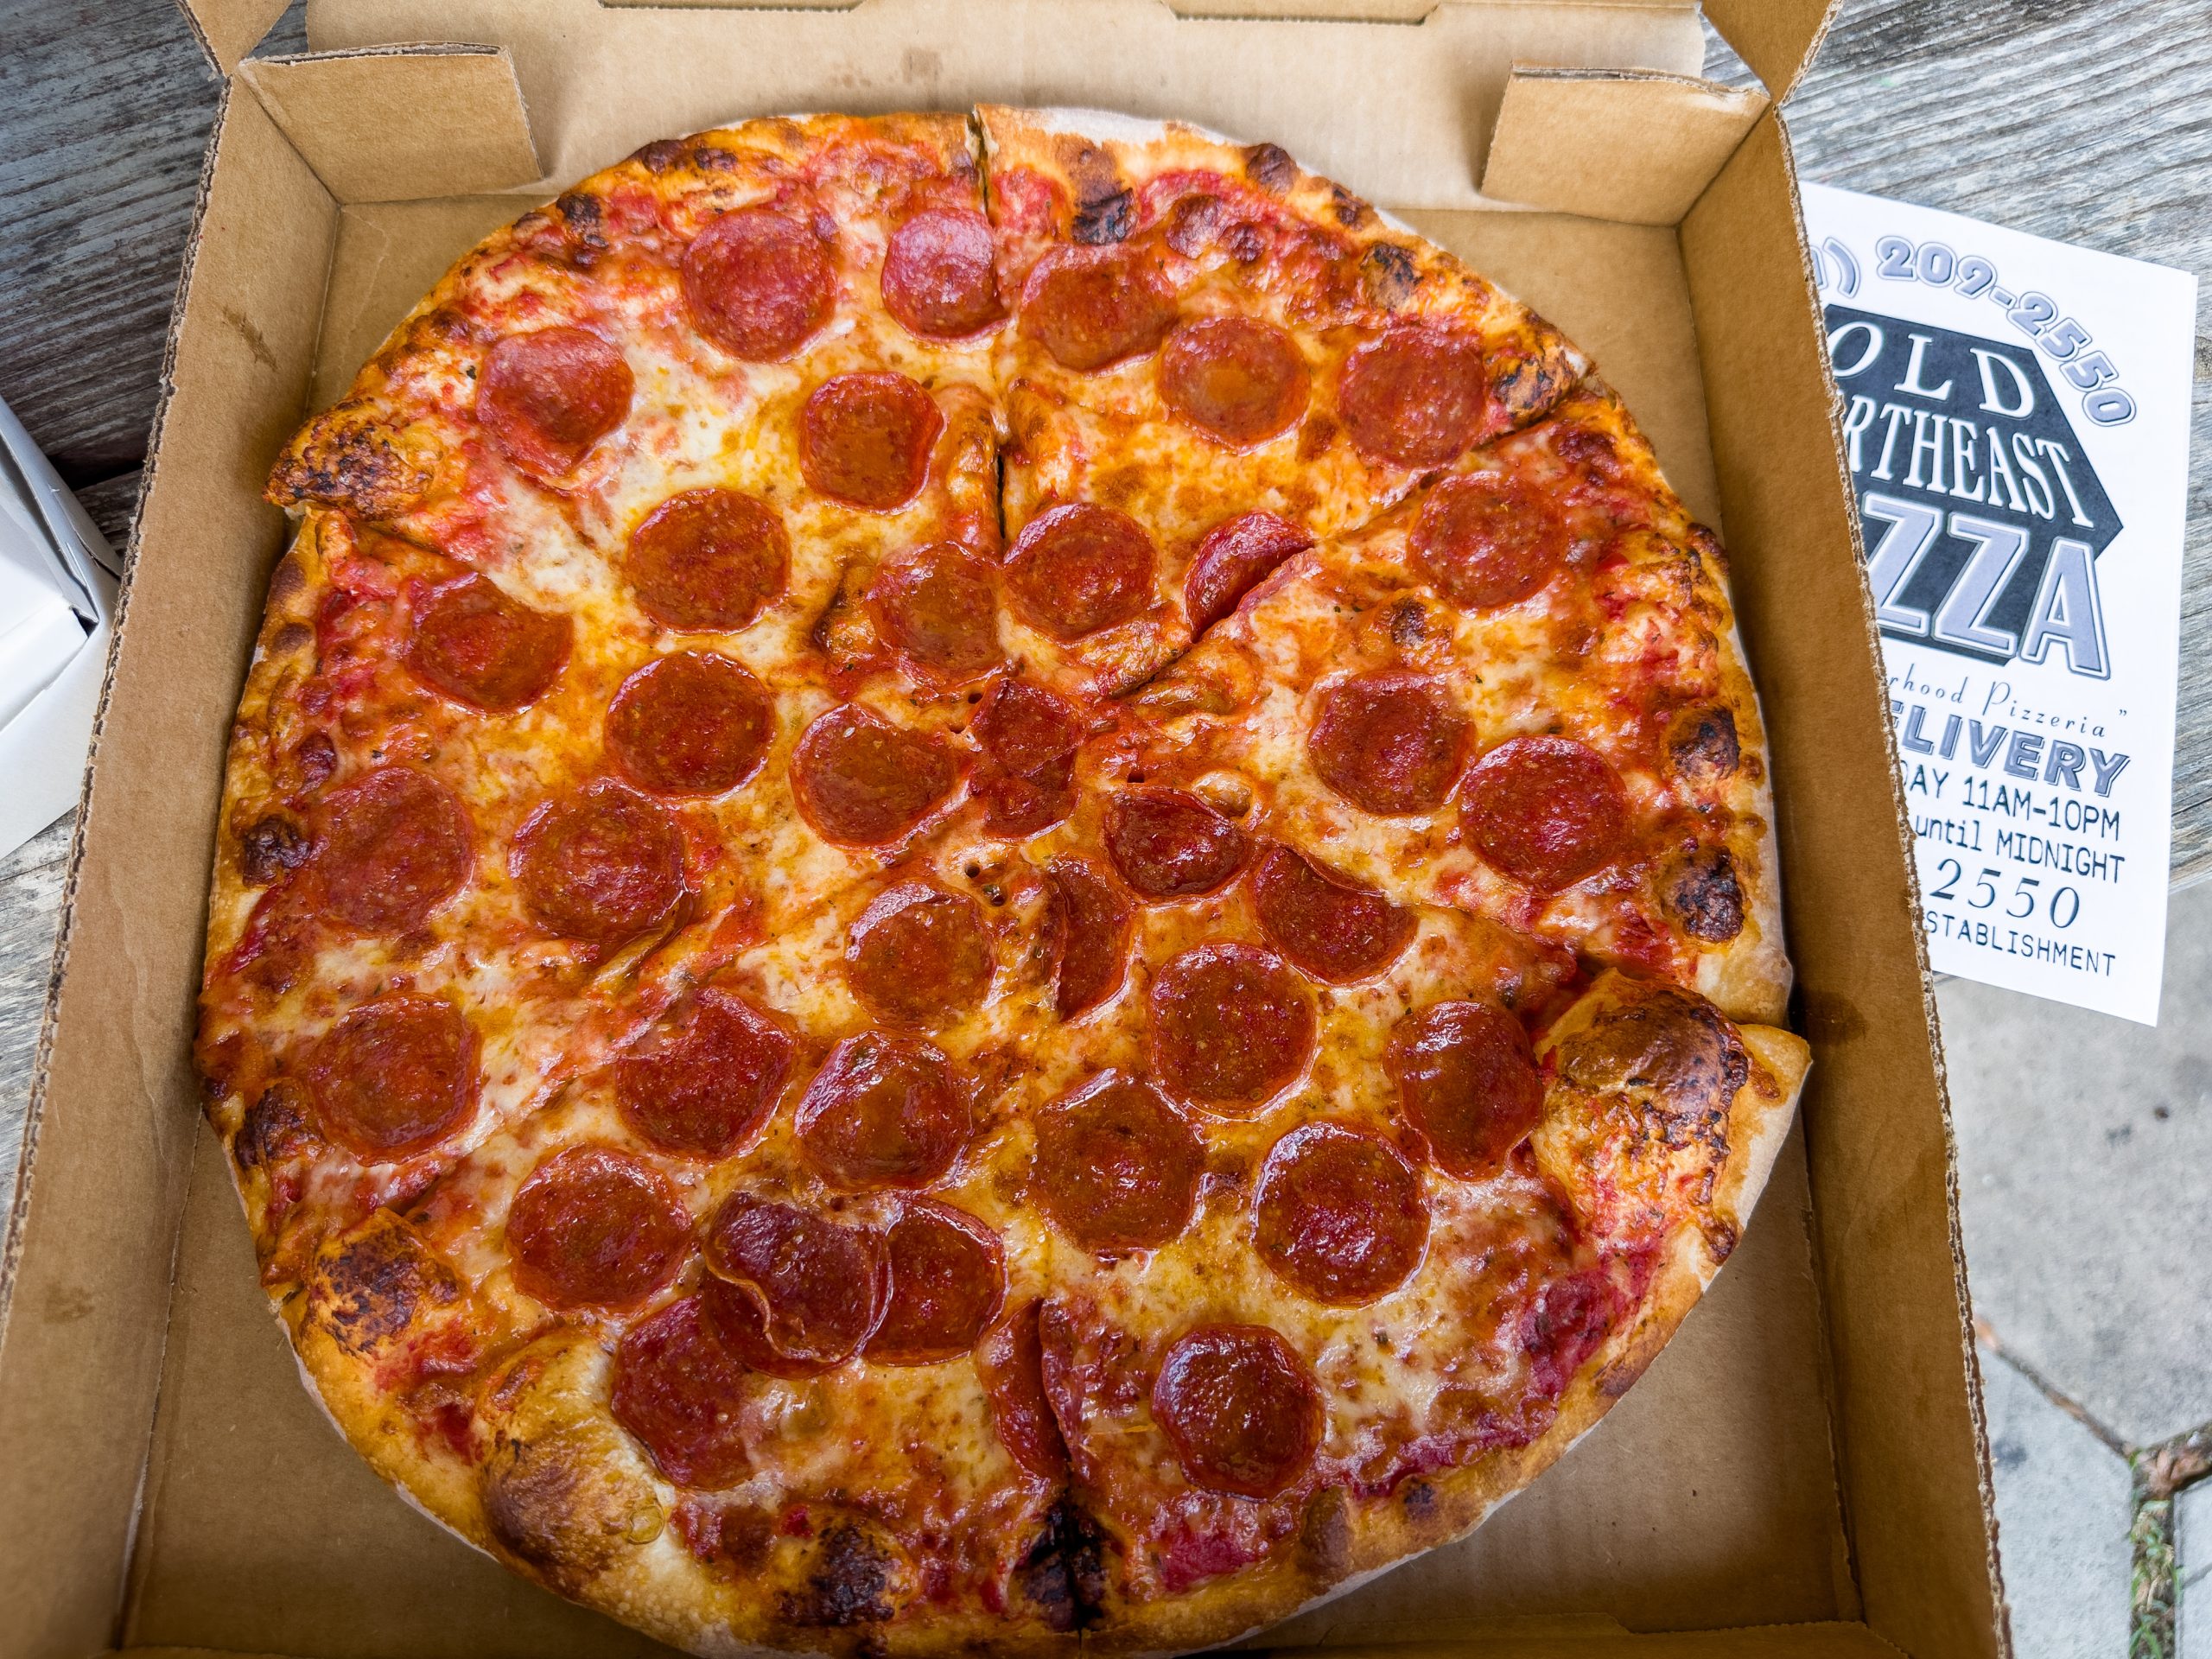 The medium pizza is comprised of six large slices